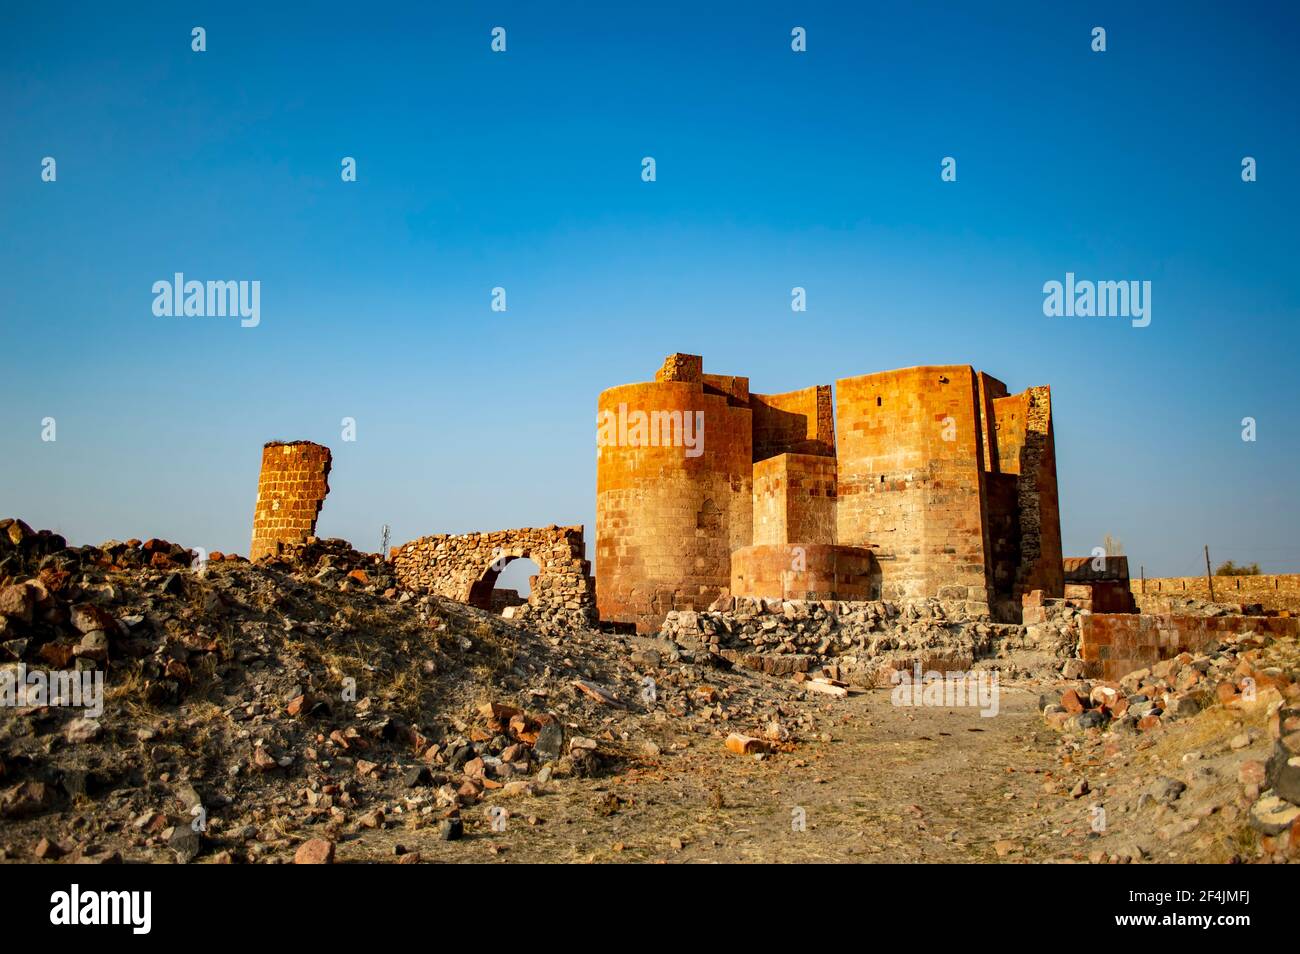 The Keep of the Dashtadem fortress in Aragatsotn province of Armenia Stock Photo